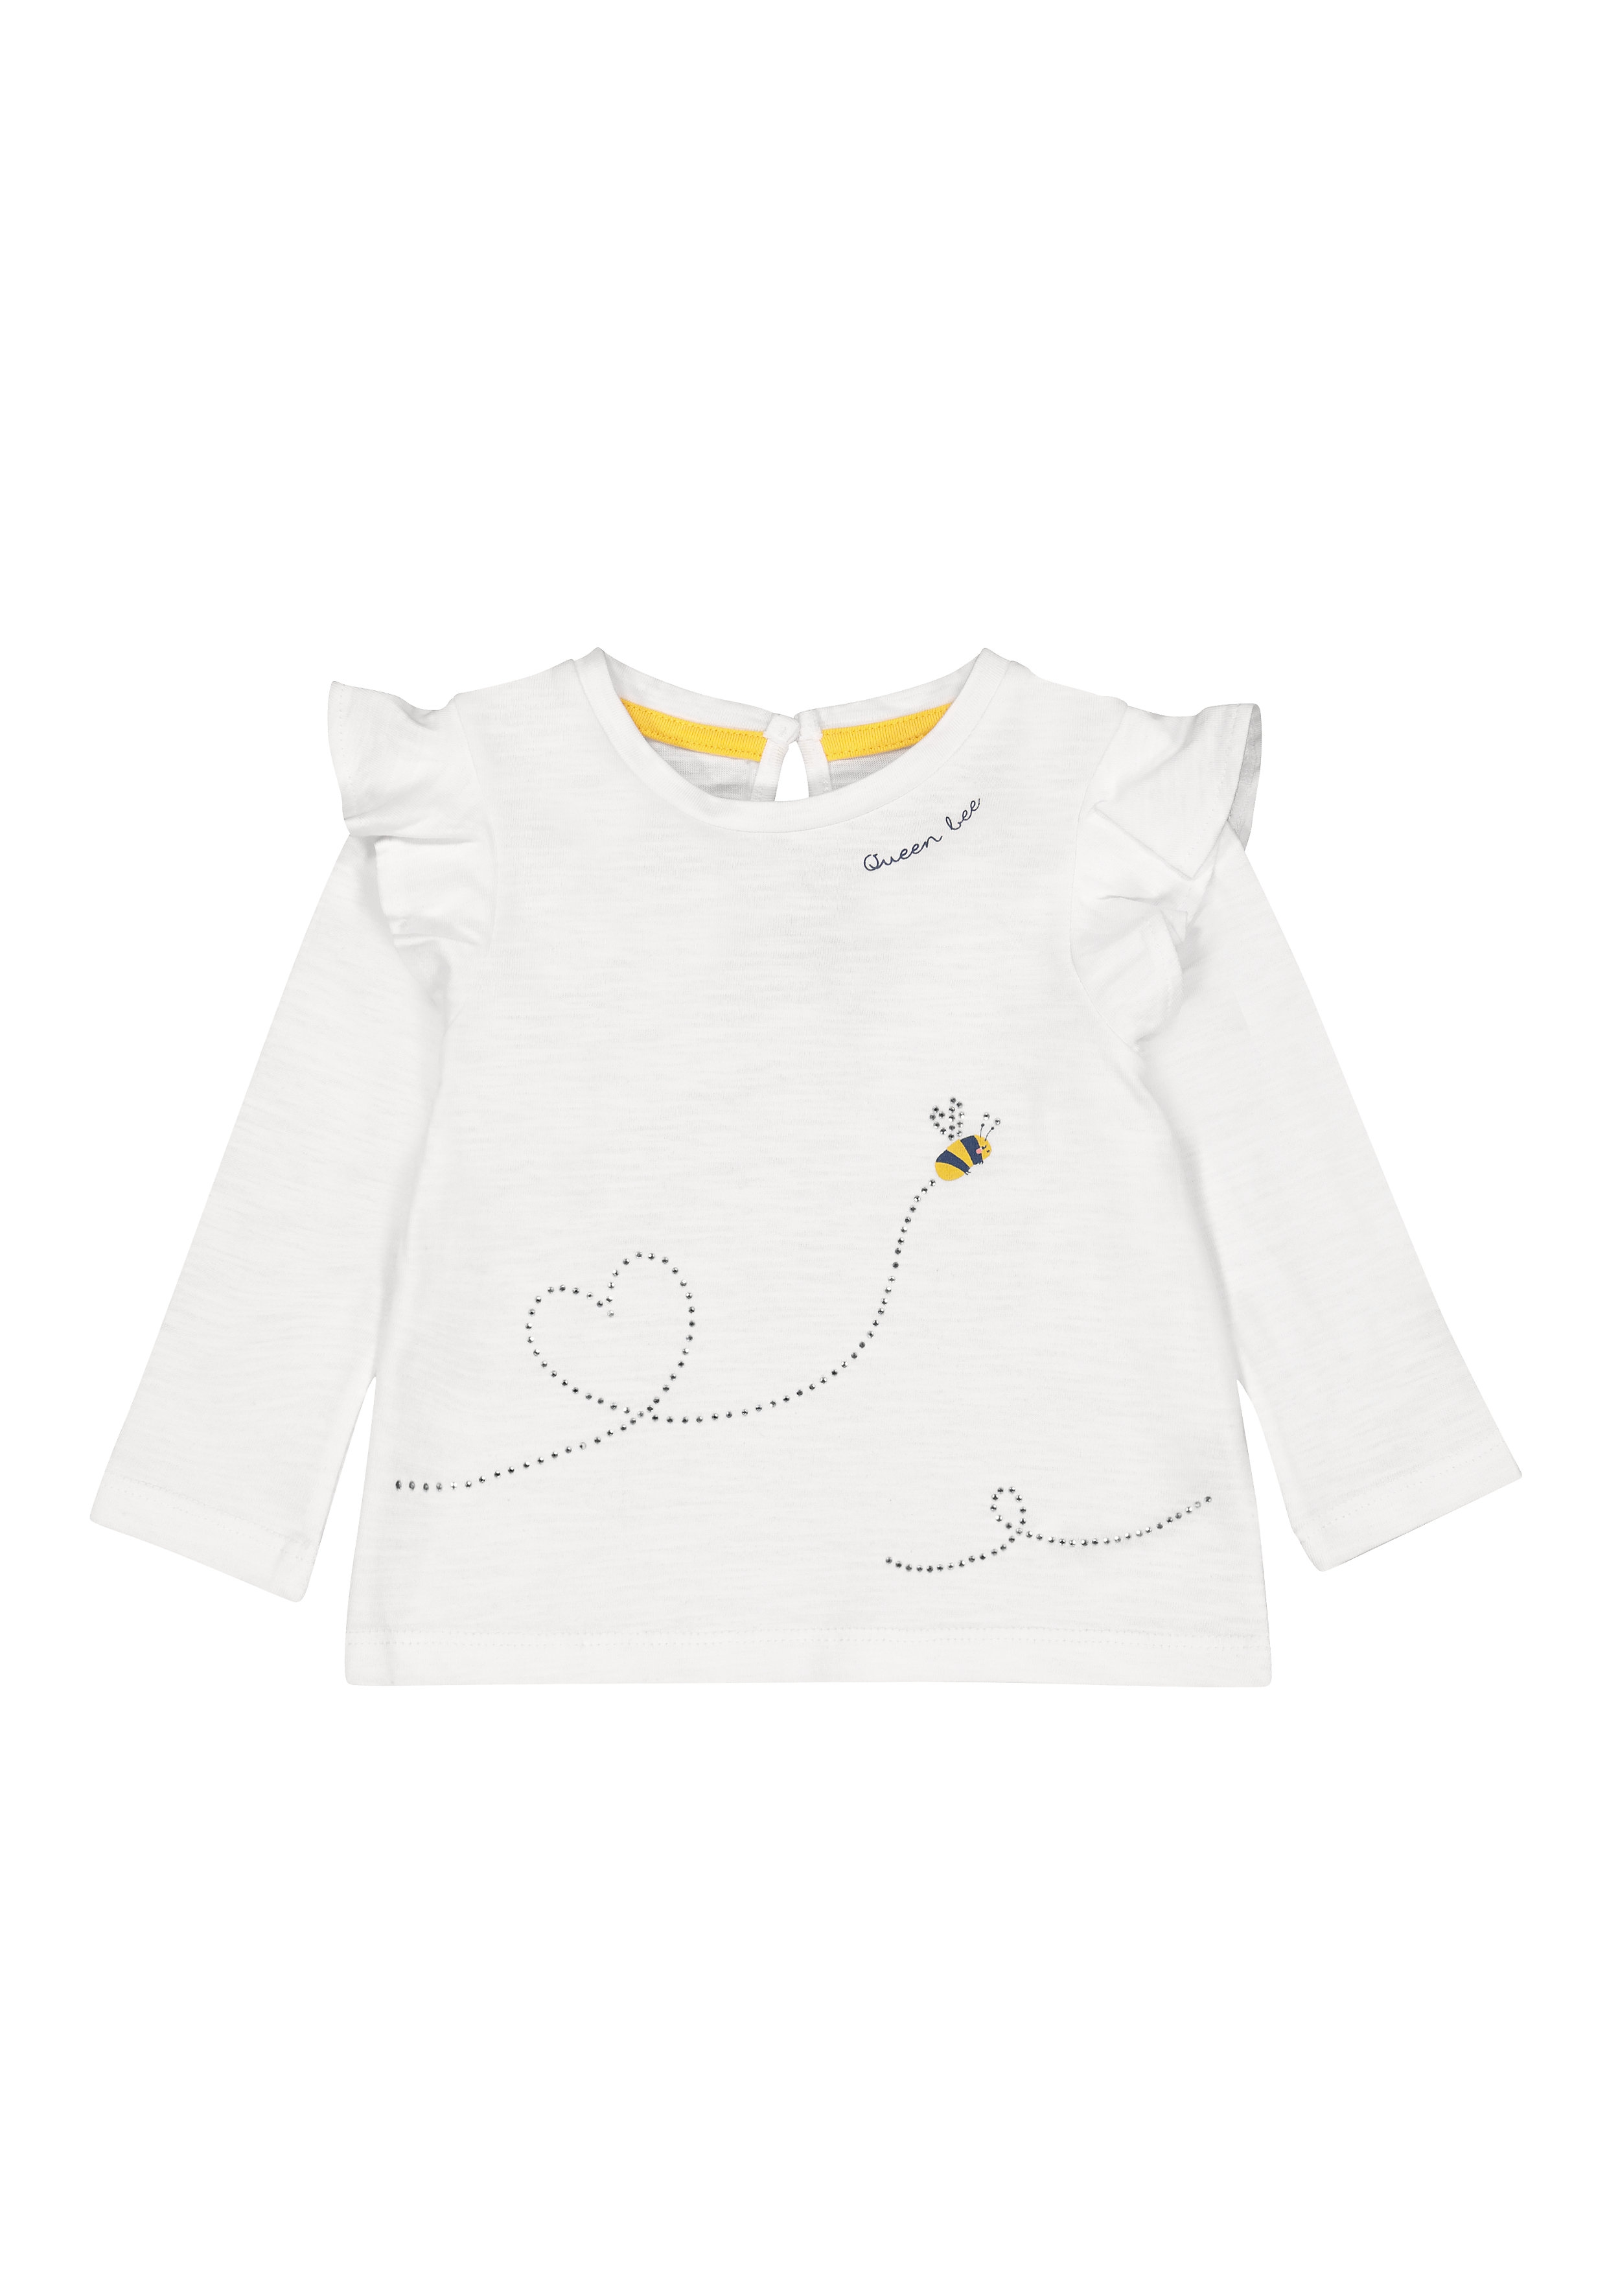 Mothercare | Girls Full Sleeves T-Shirt Sparkly Bee Print - White